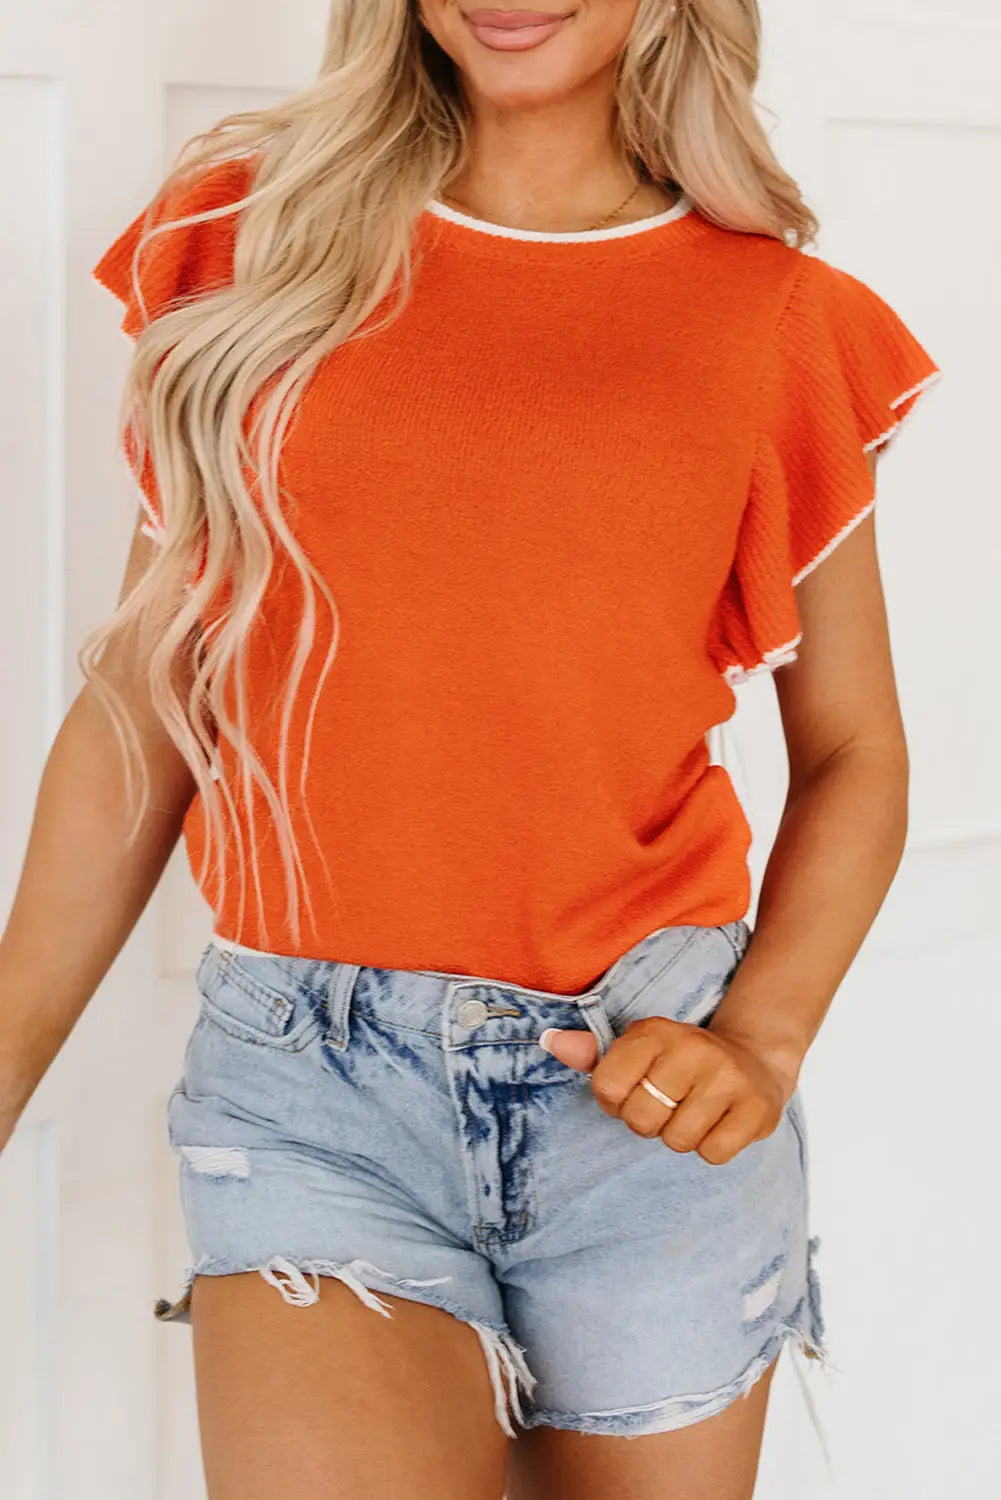 Russet orange short sleeve knitted top - s / 96% acrylic + 4% polyamide - tops